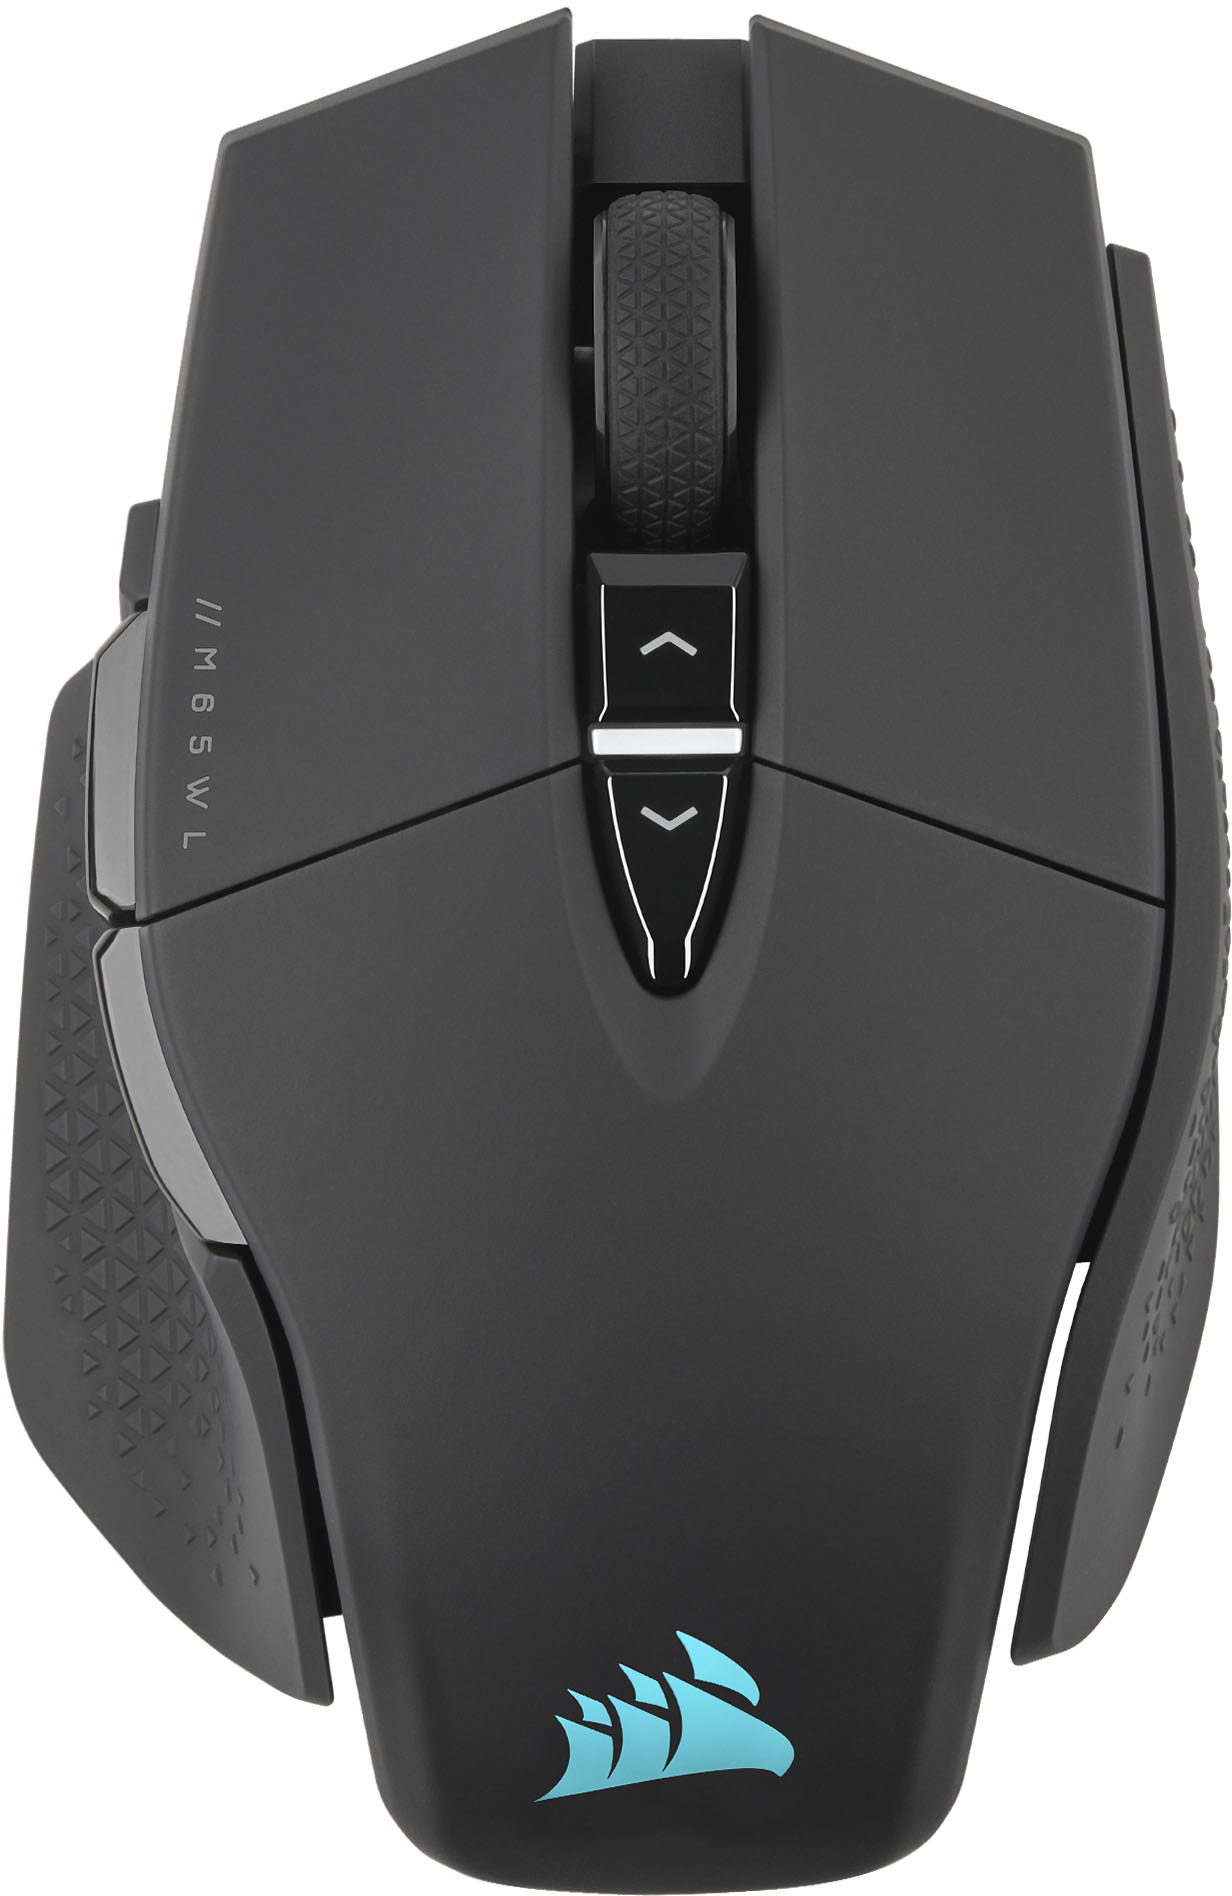 CORSAIR - M65 RGB ULTRA WIRELESS Optical 8 Button Gaming Mouse with Slipstream Technology - Black